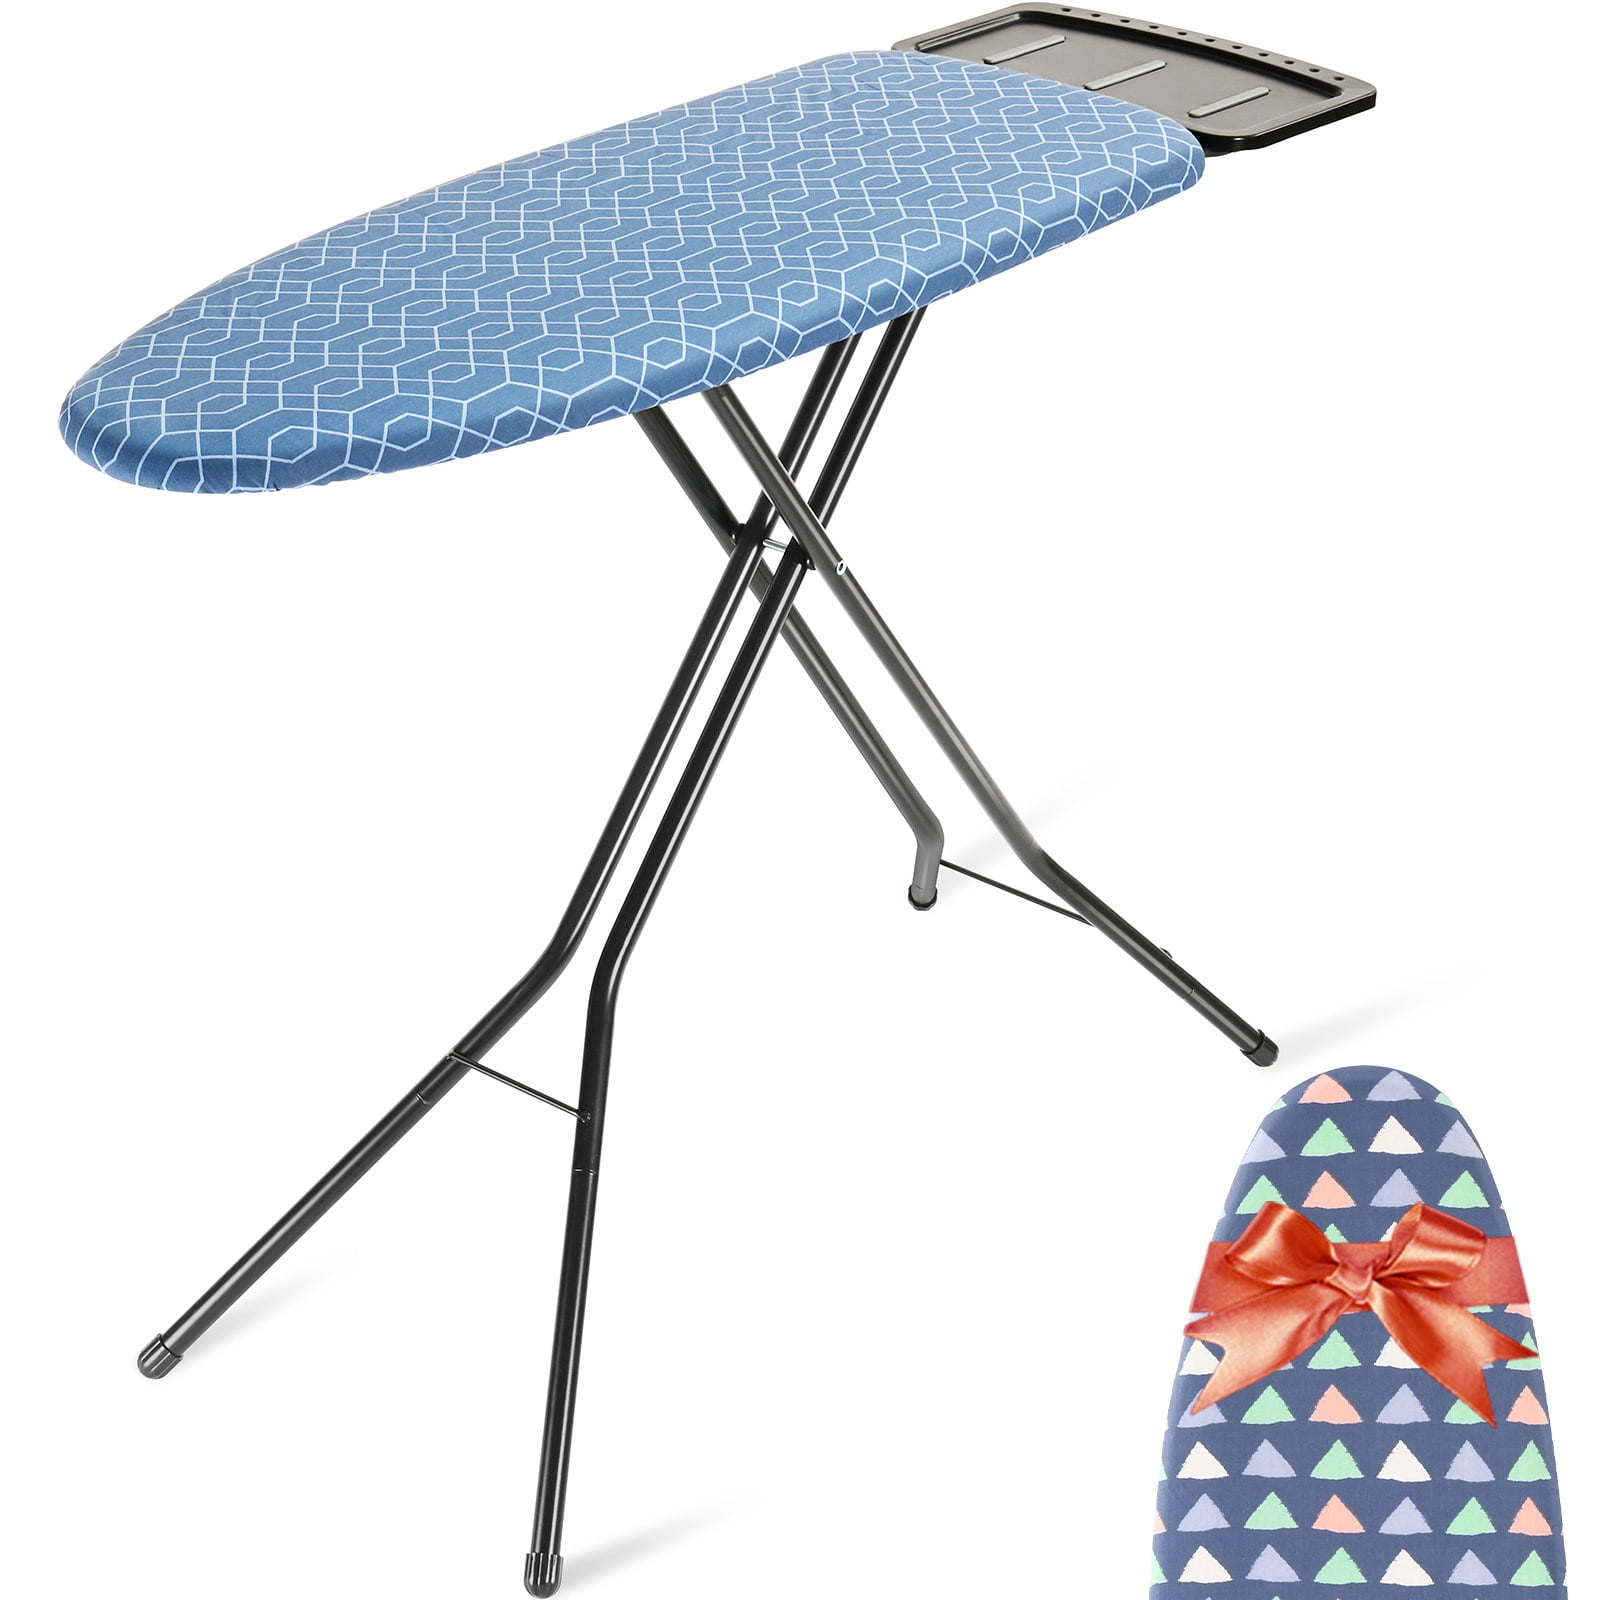 This iron attached to a table doubles up so you'll never have to hide your ironing  board again! - Yanko Design